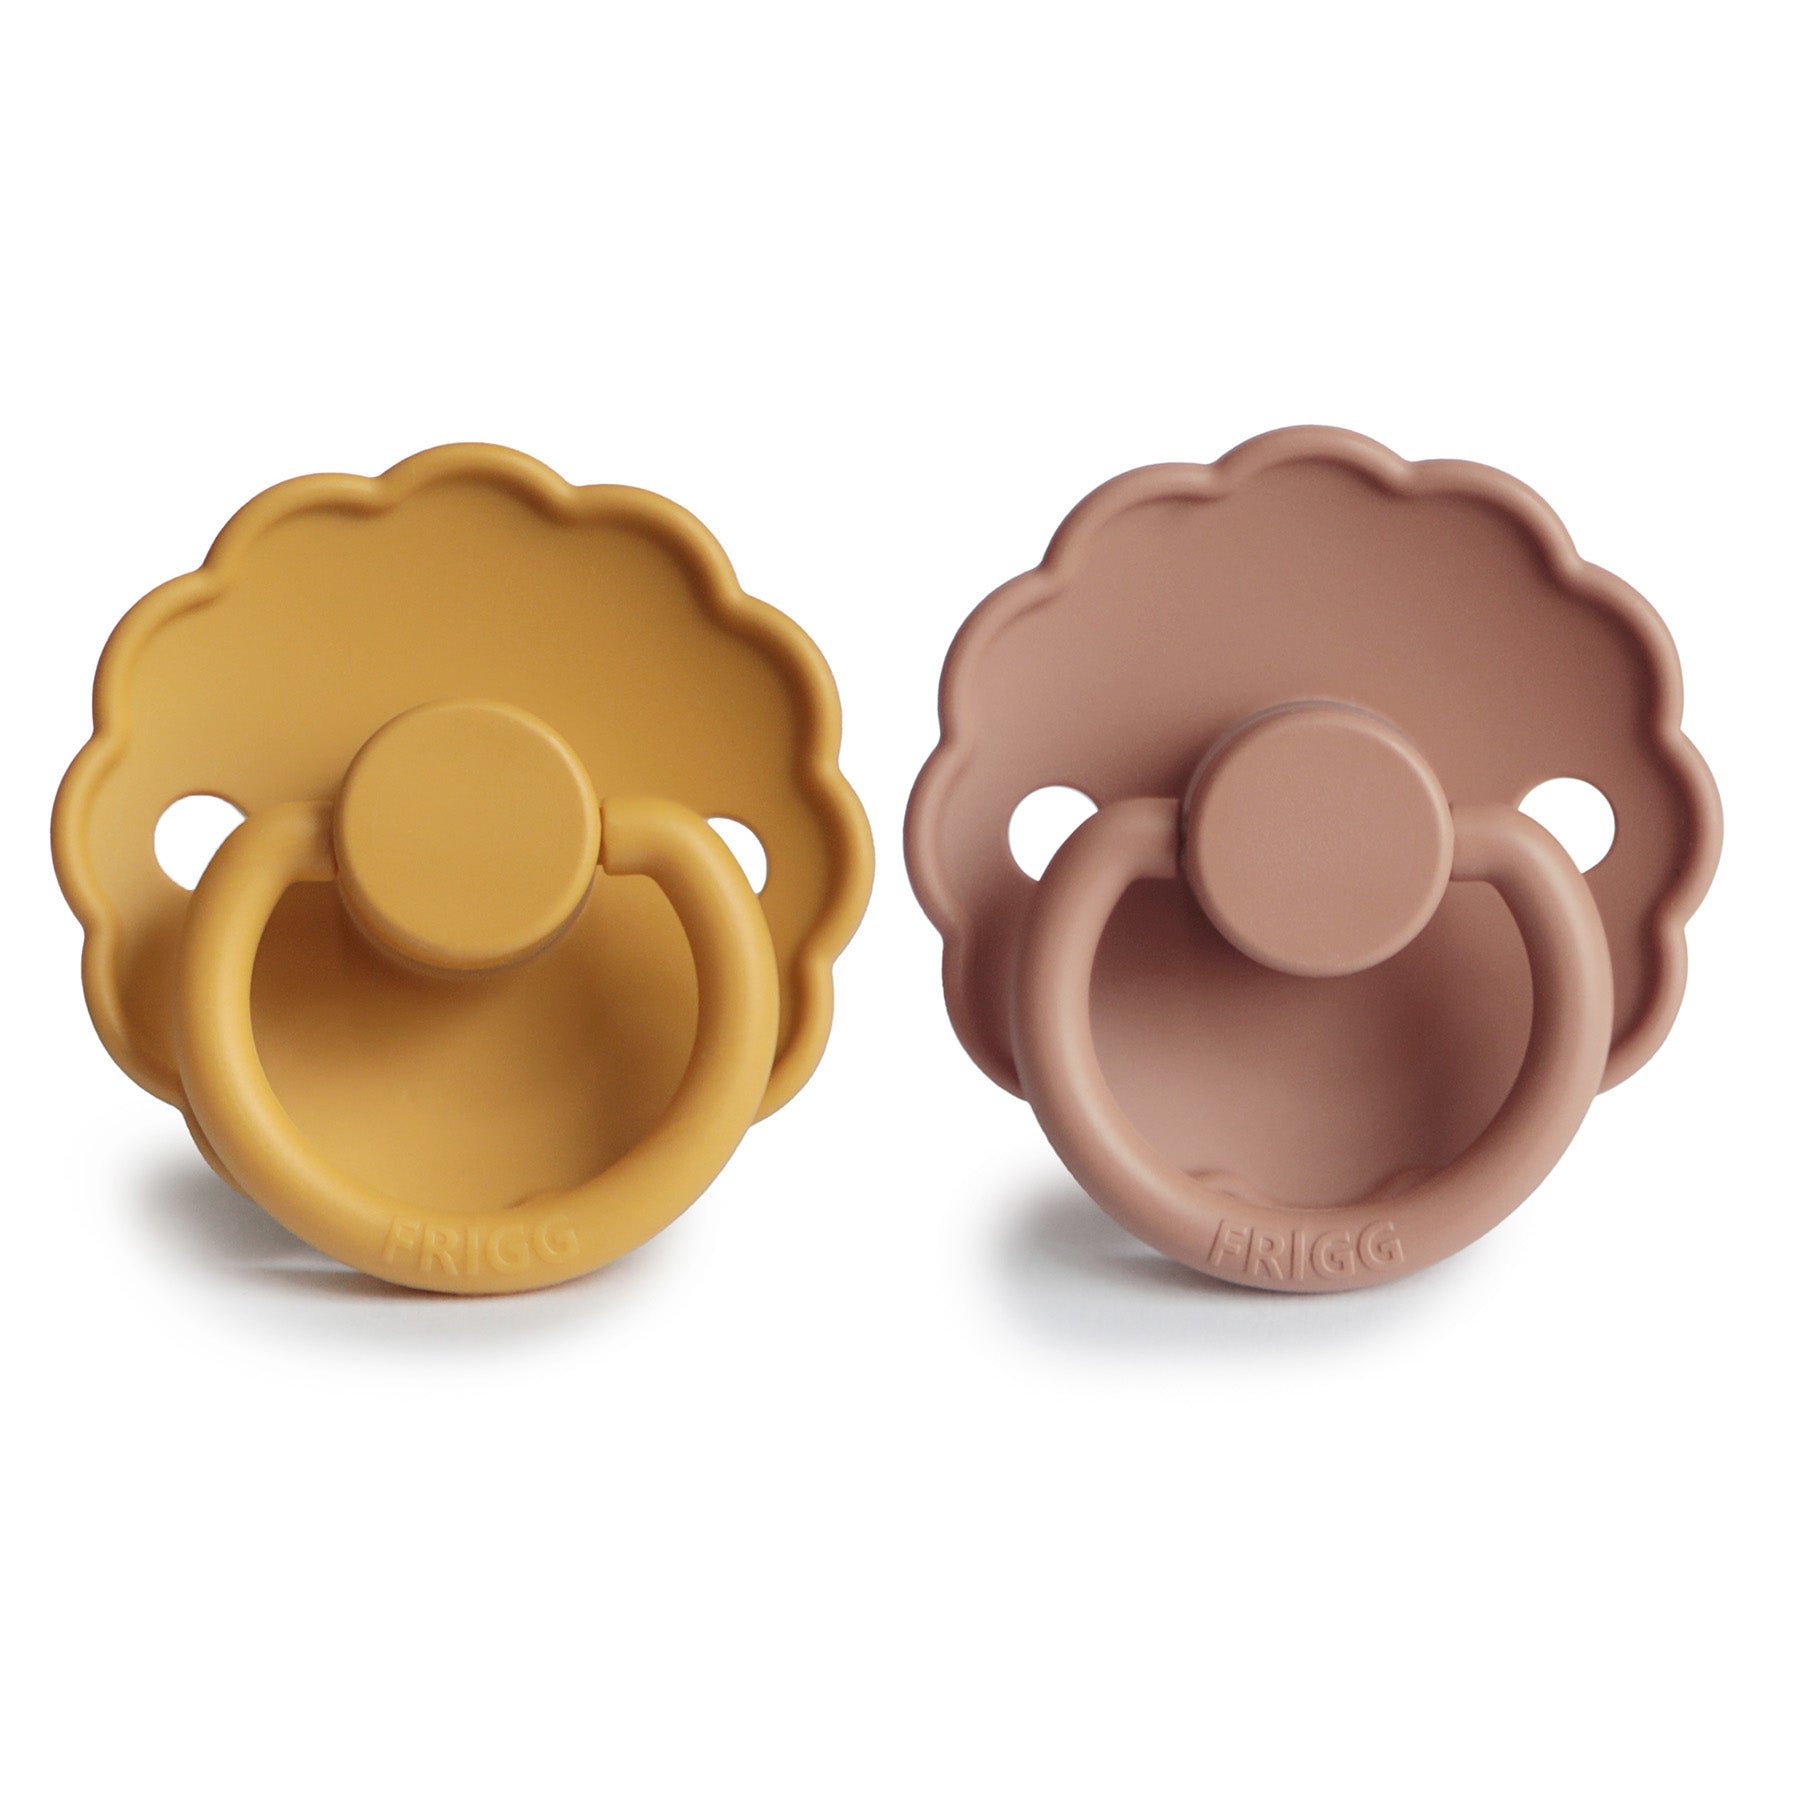 Frigg Daisy Silicone Pacifier - Honey Gold + Rose Gold available at Little Mash Boutique